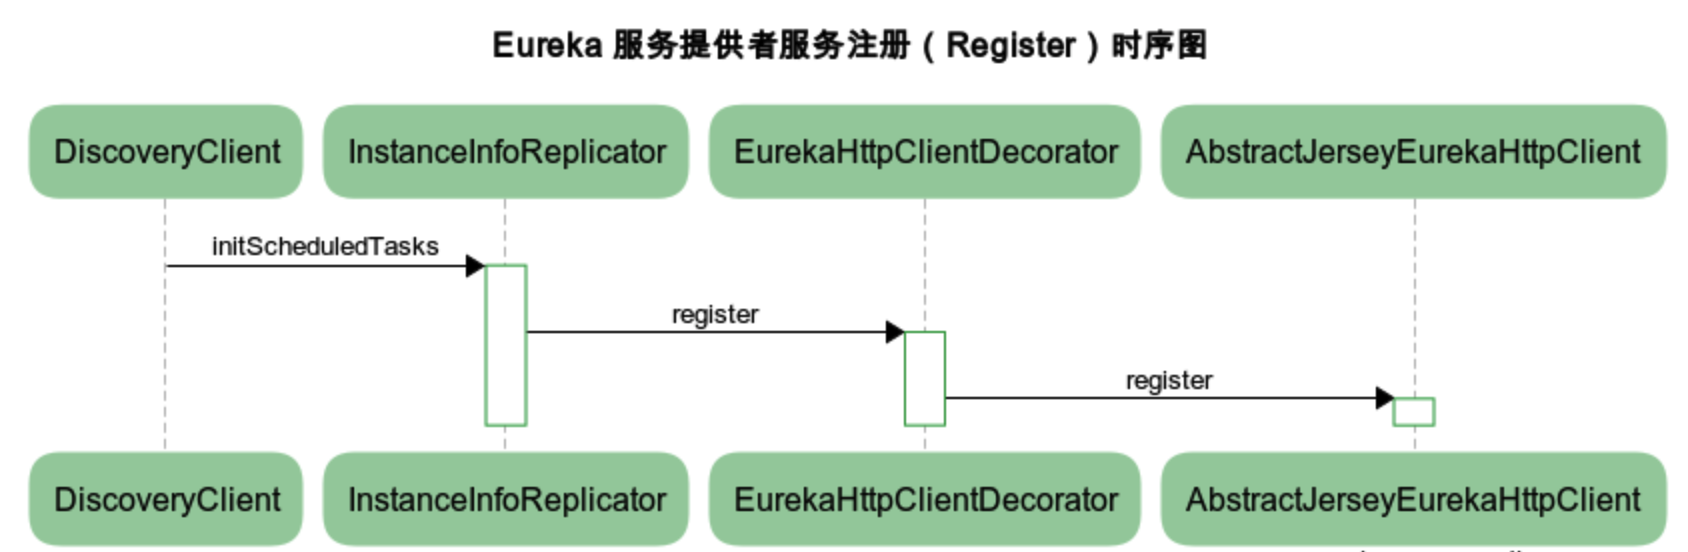 service-provider-register-sequence-chart.png